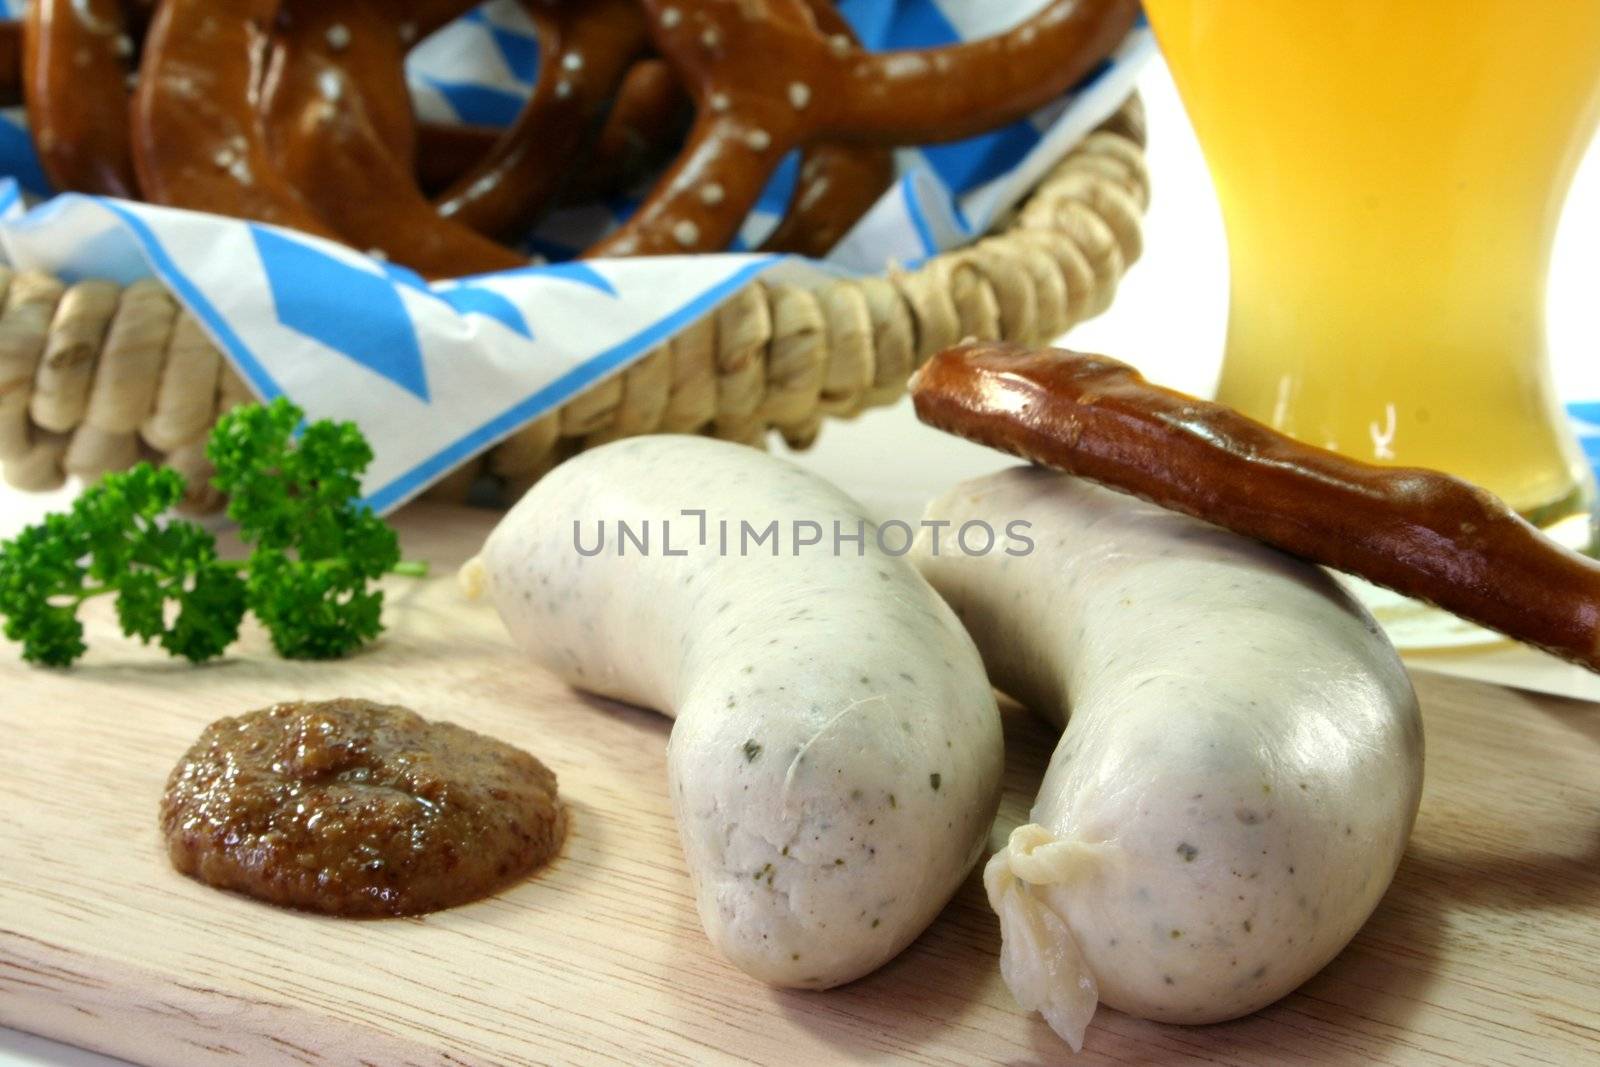 veal sausage with sweet mustard and pretzels